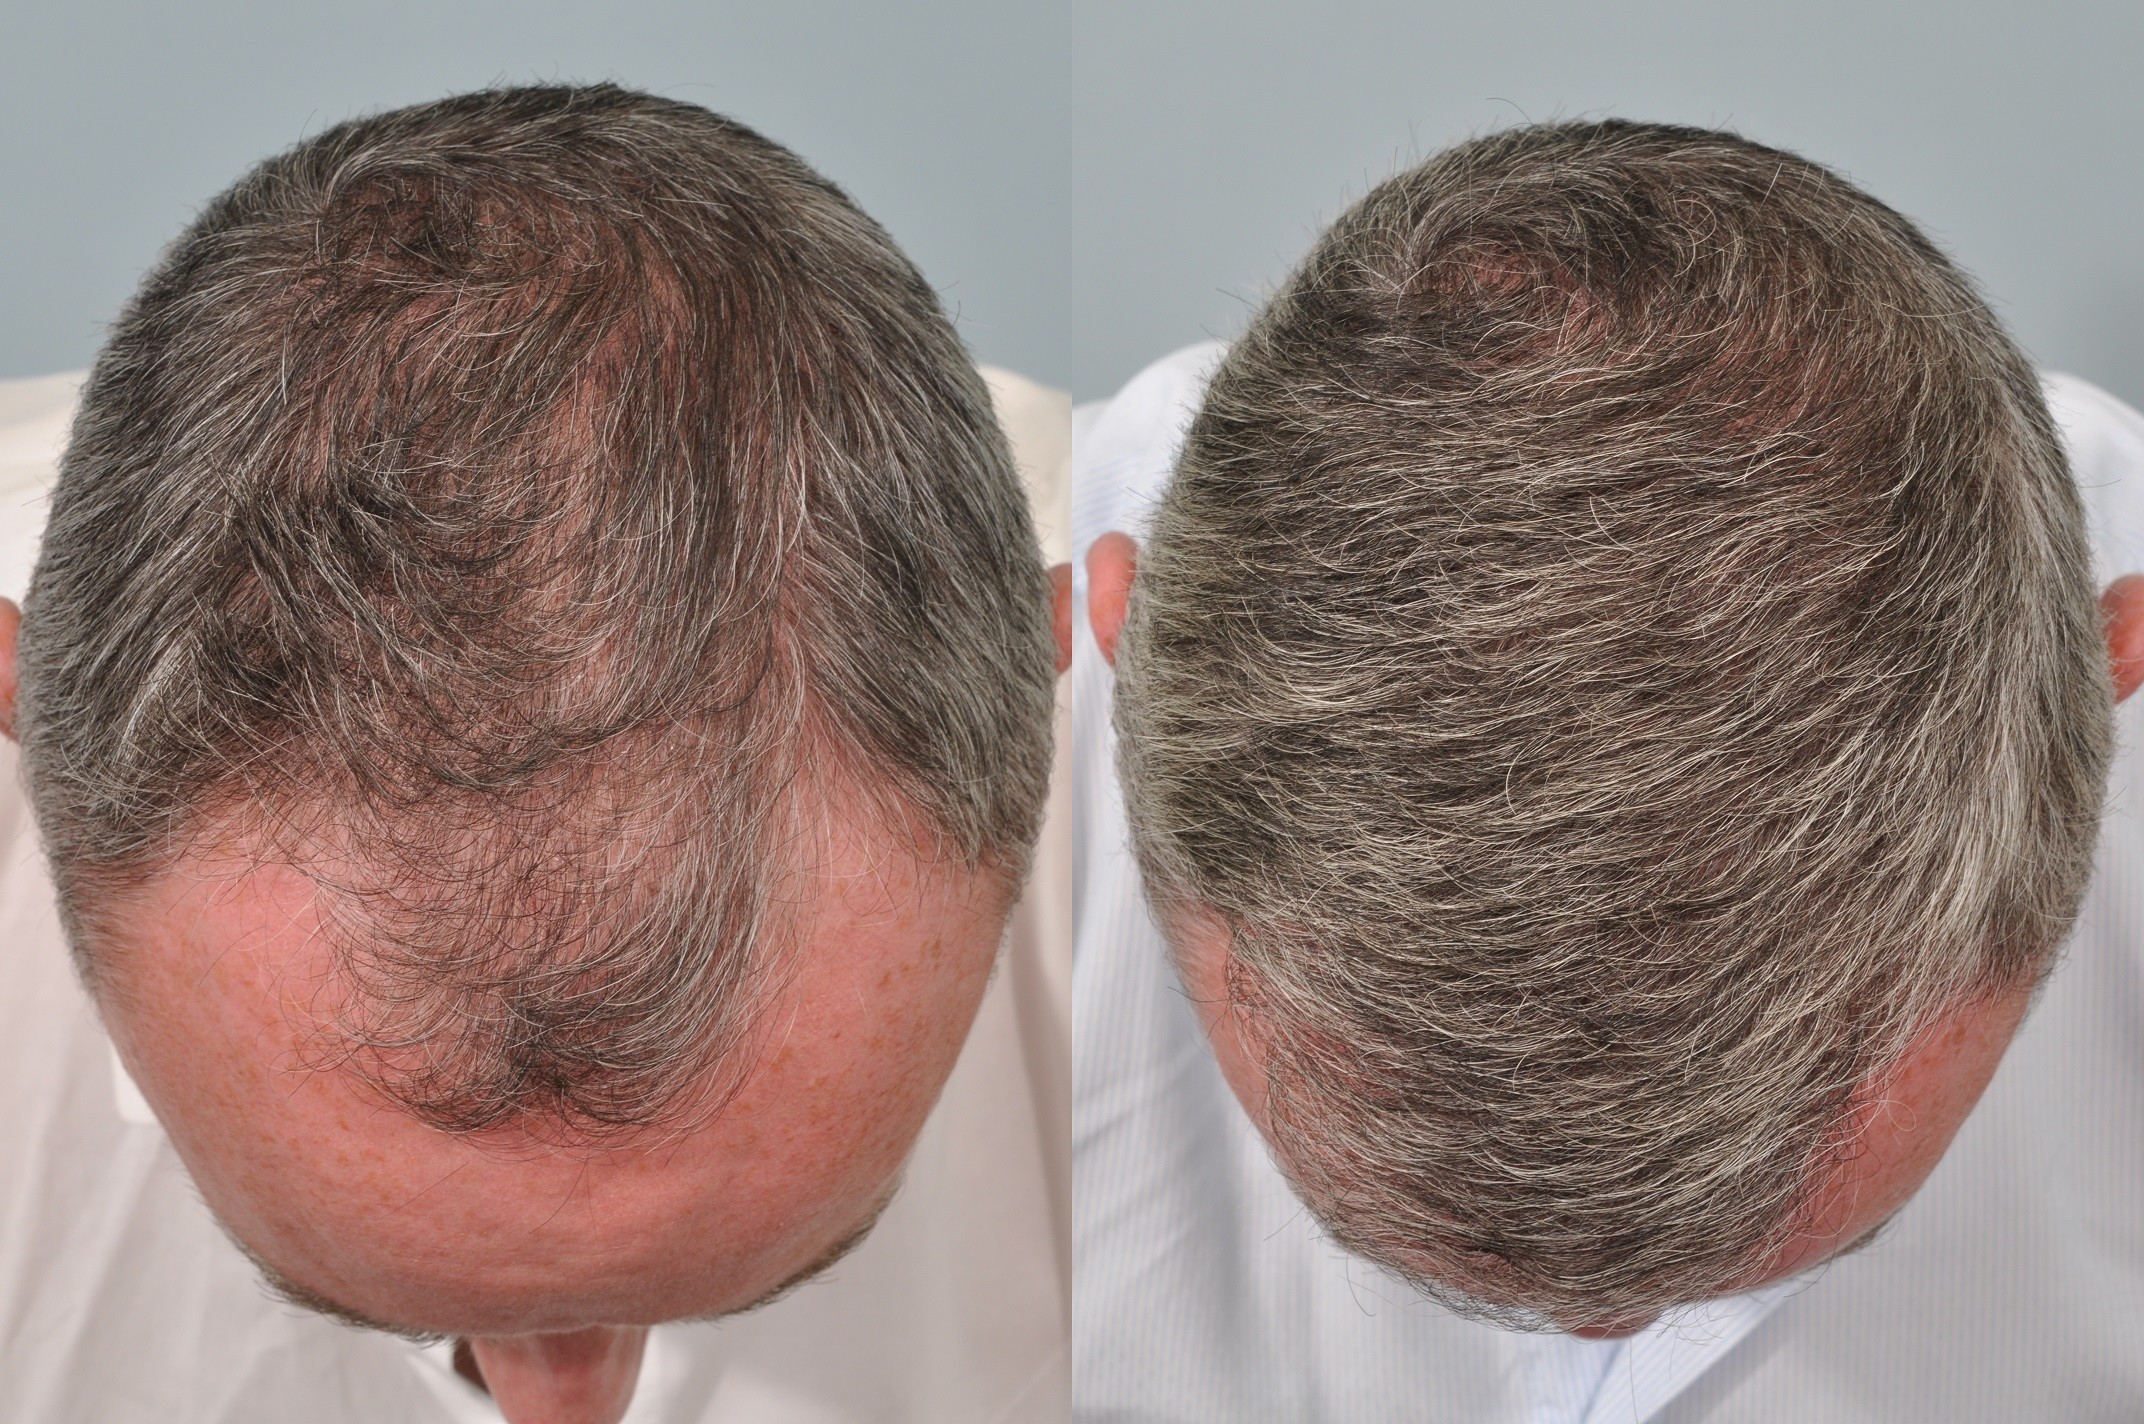 Hair Transplant After 2 Months Photos Results Side Effects